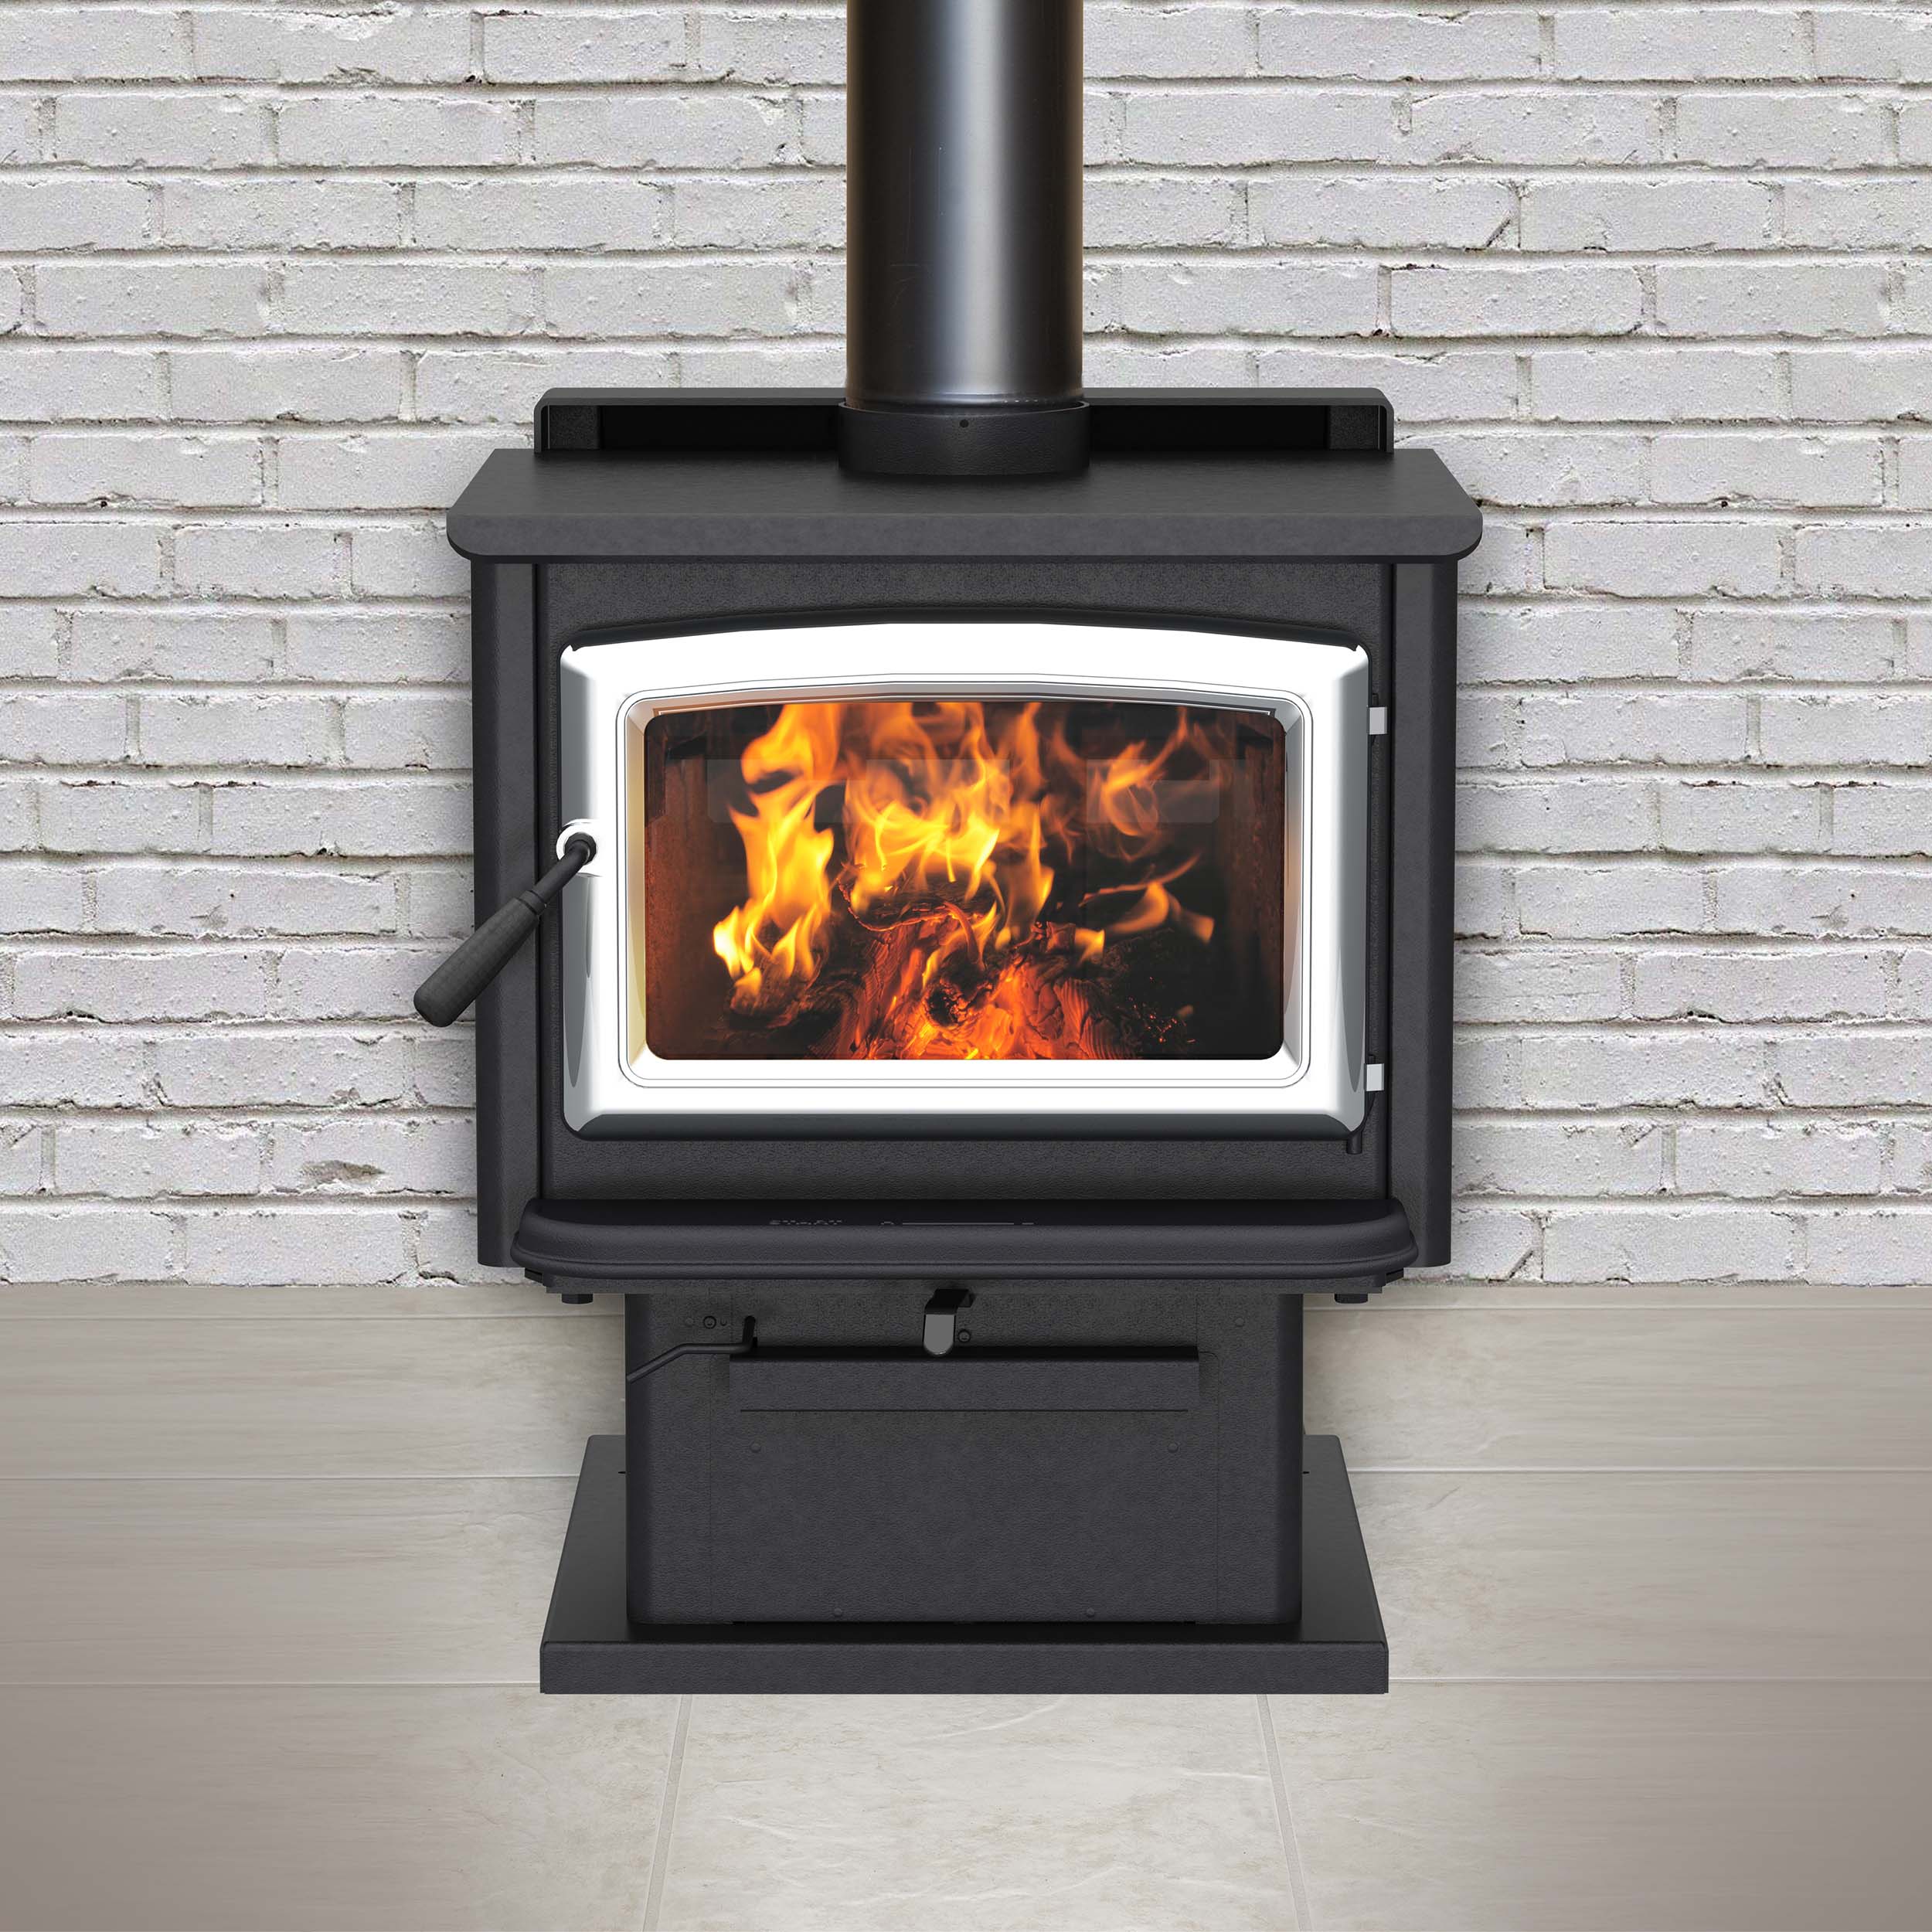 Pacific Energy Super LE Traditional Steel Wood Stove - Freestanding with Legs